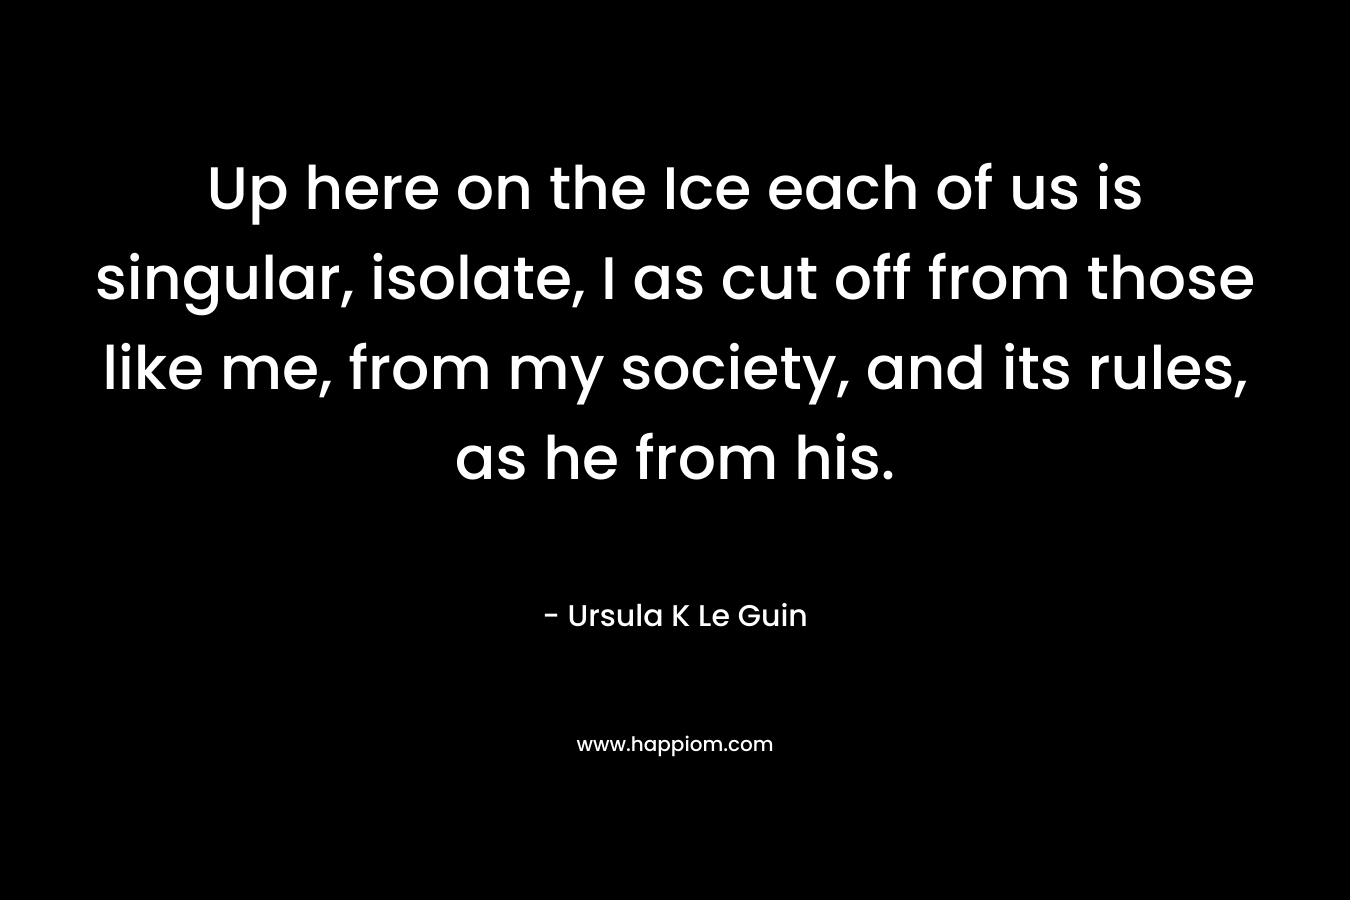 Up here on the Ice each of us is singular, isolate, I as cut off from those like me, from my society, and its rules, as he from his. – Ursula K Le Guin